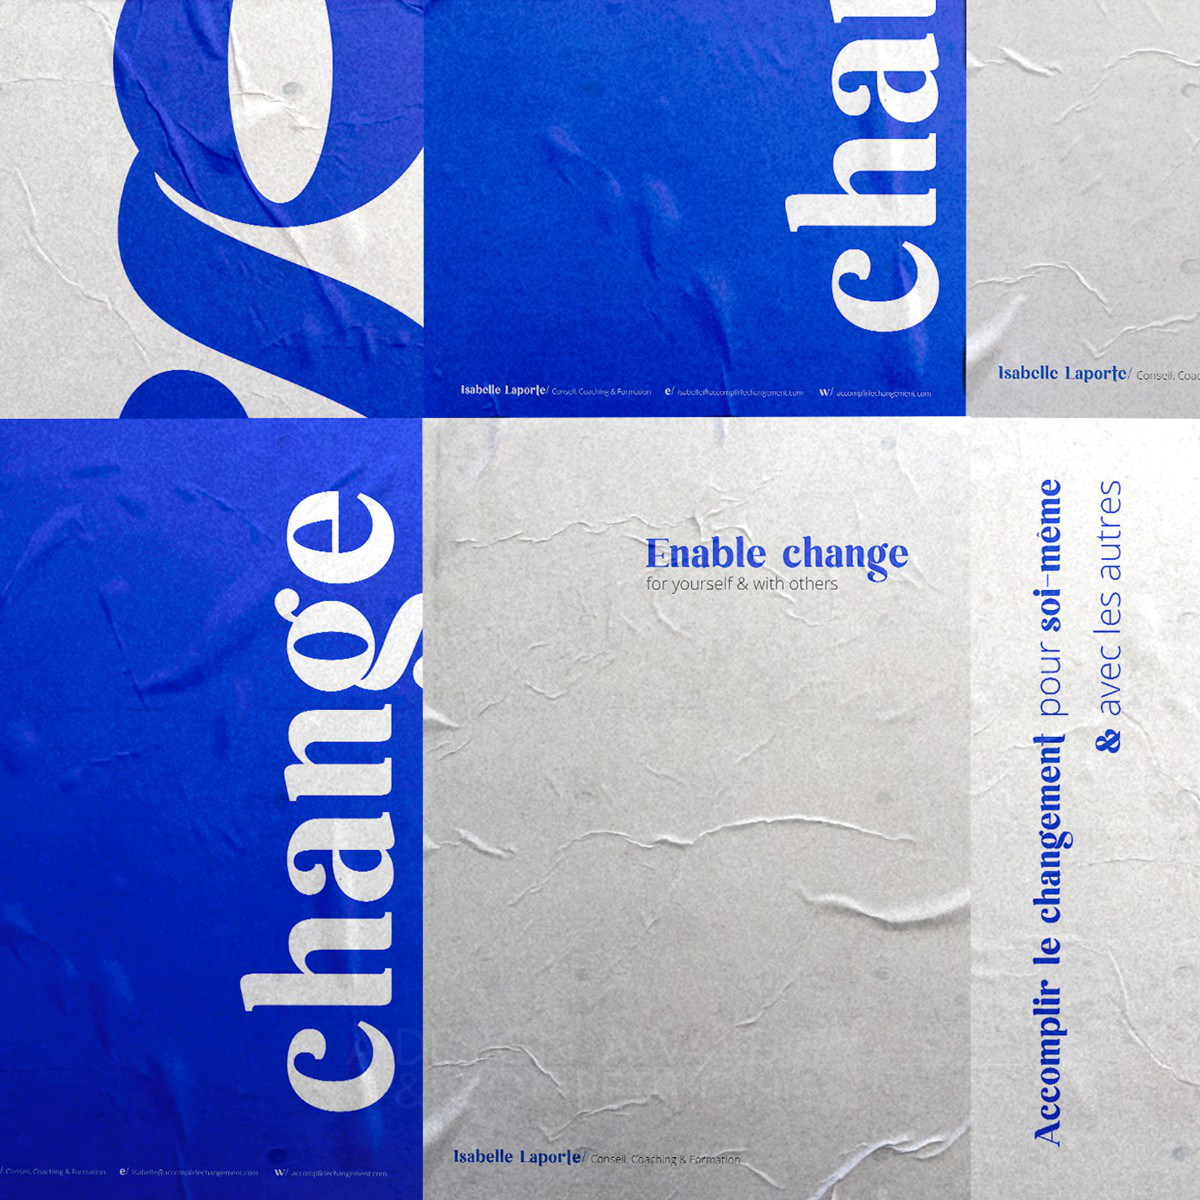 Enable Change: Brand Identity for Isabelle Laporte